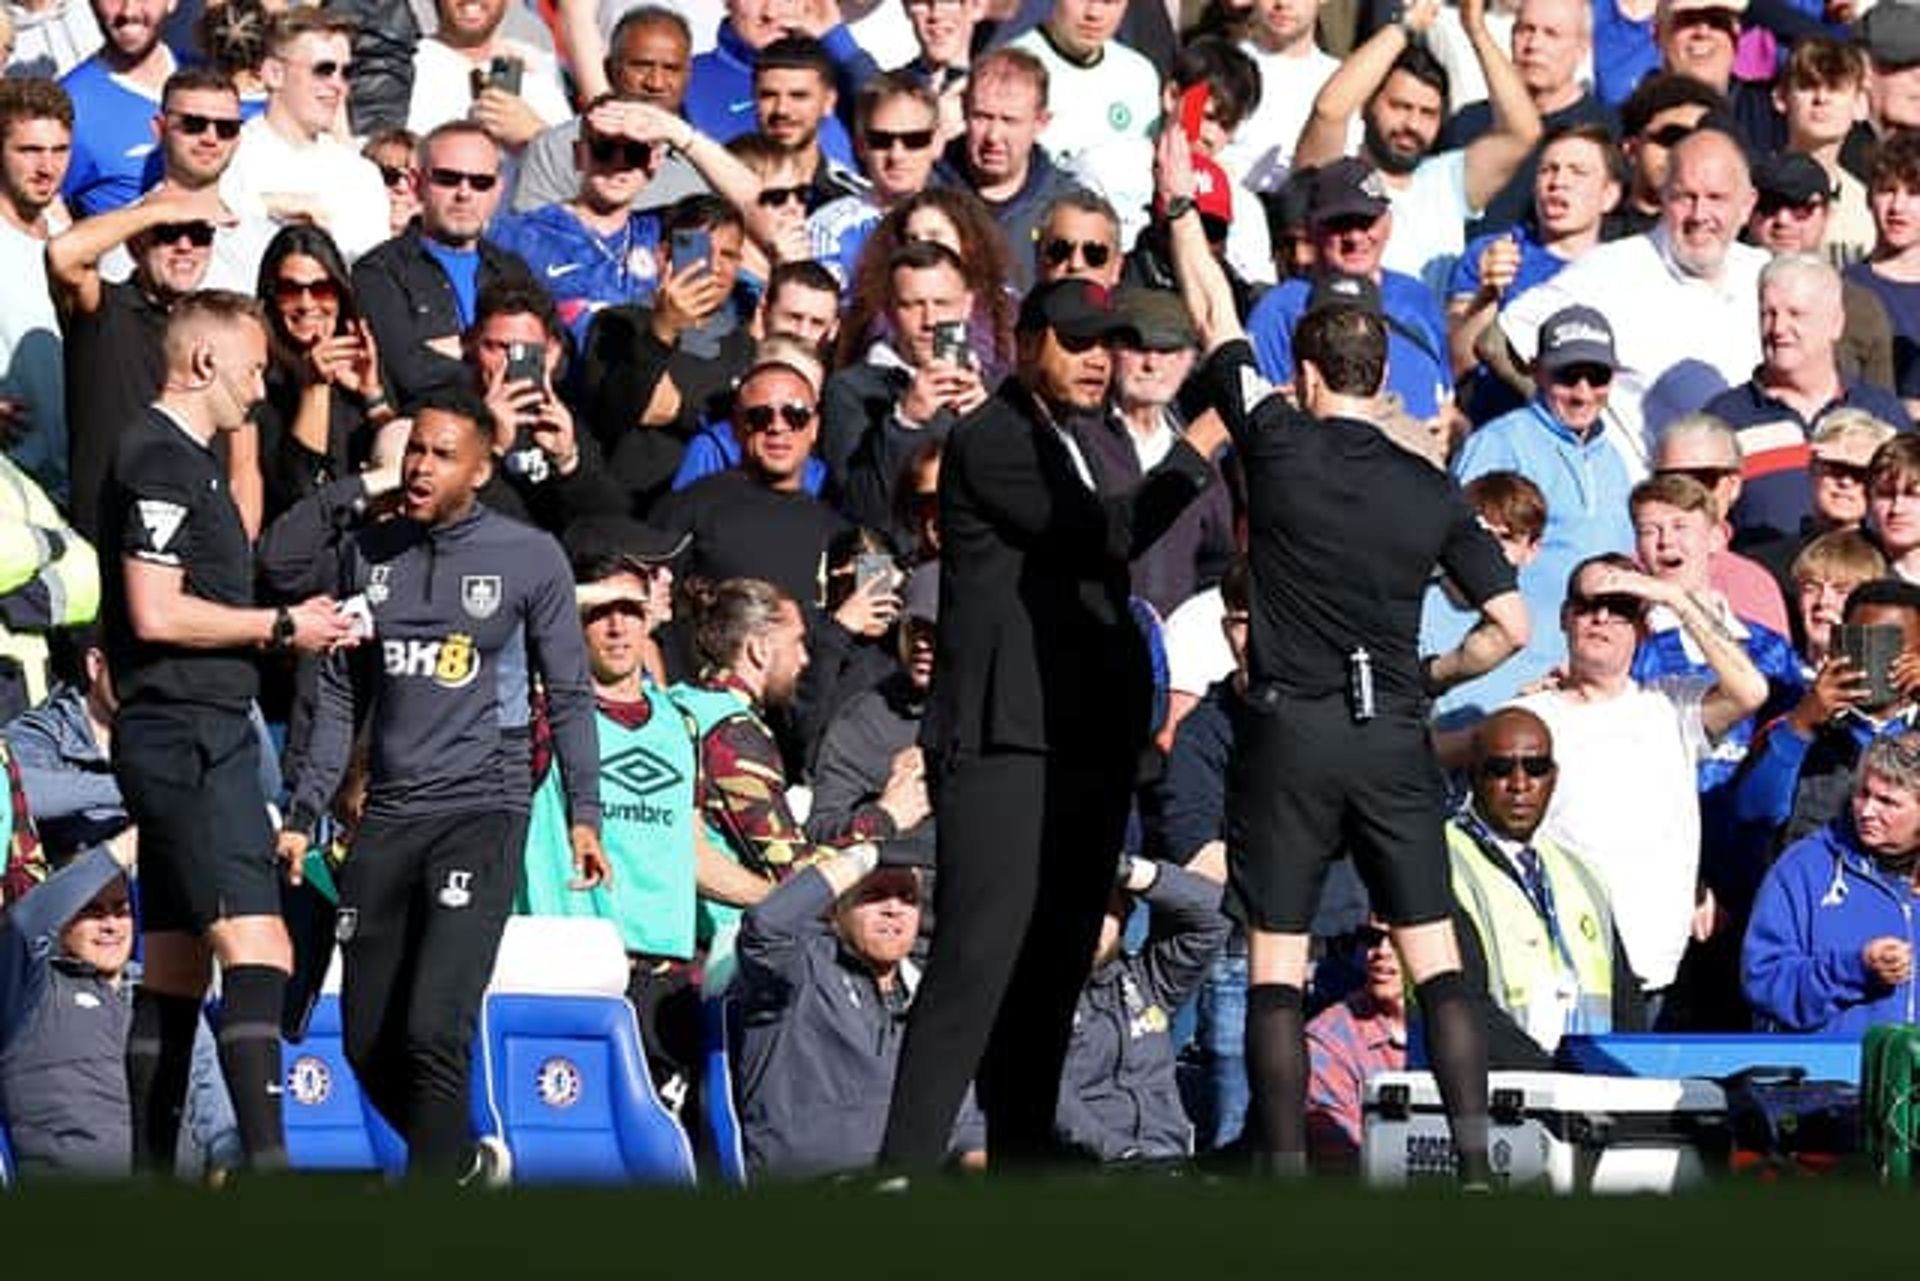 Vincent Kompany refused to leave after being shown a red card in Burnley